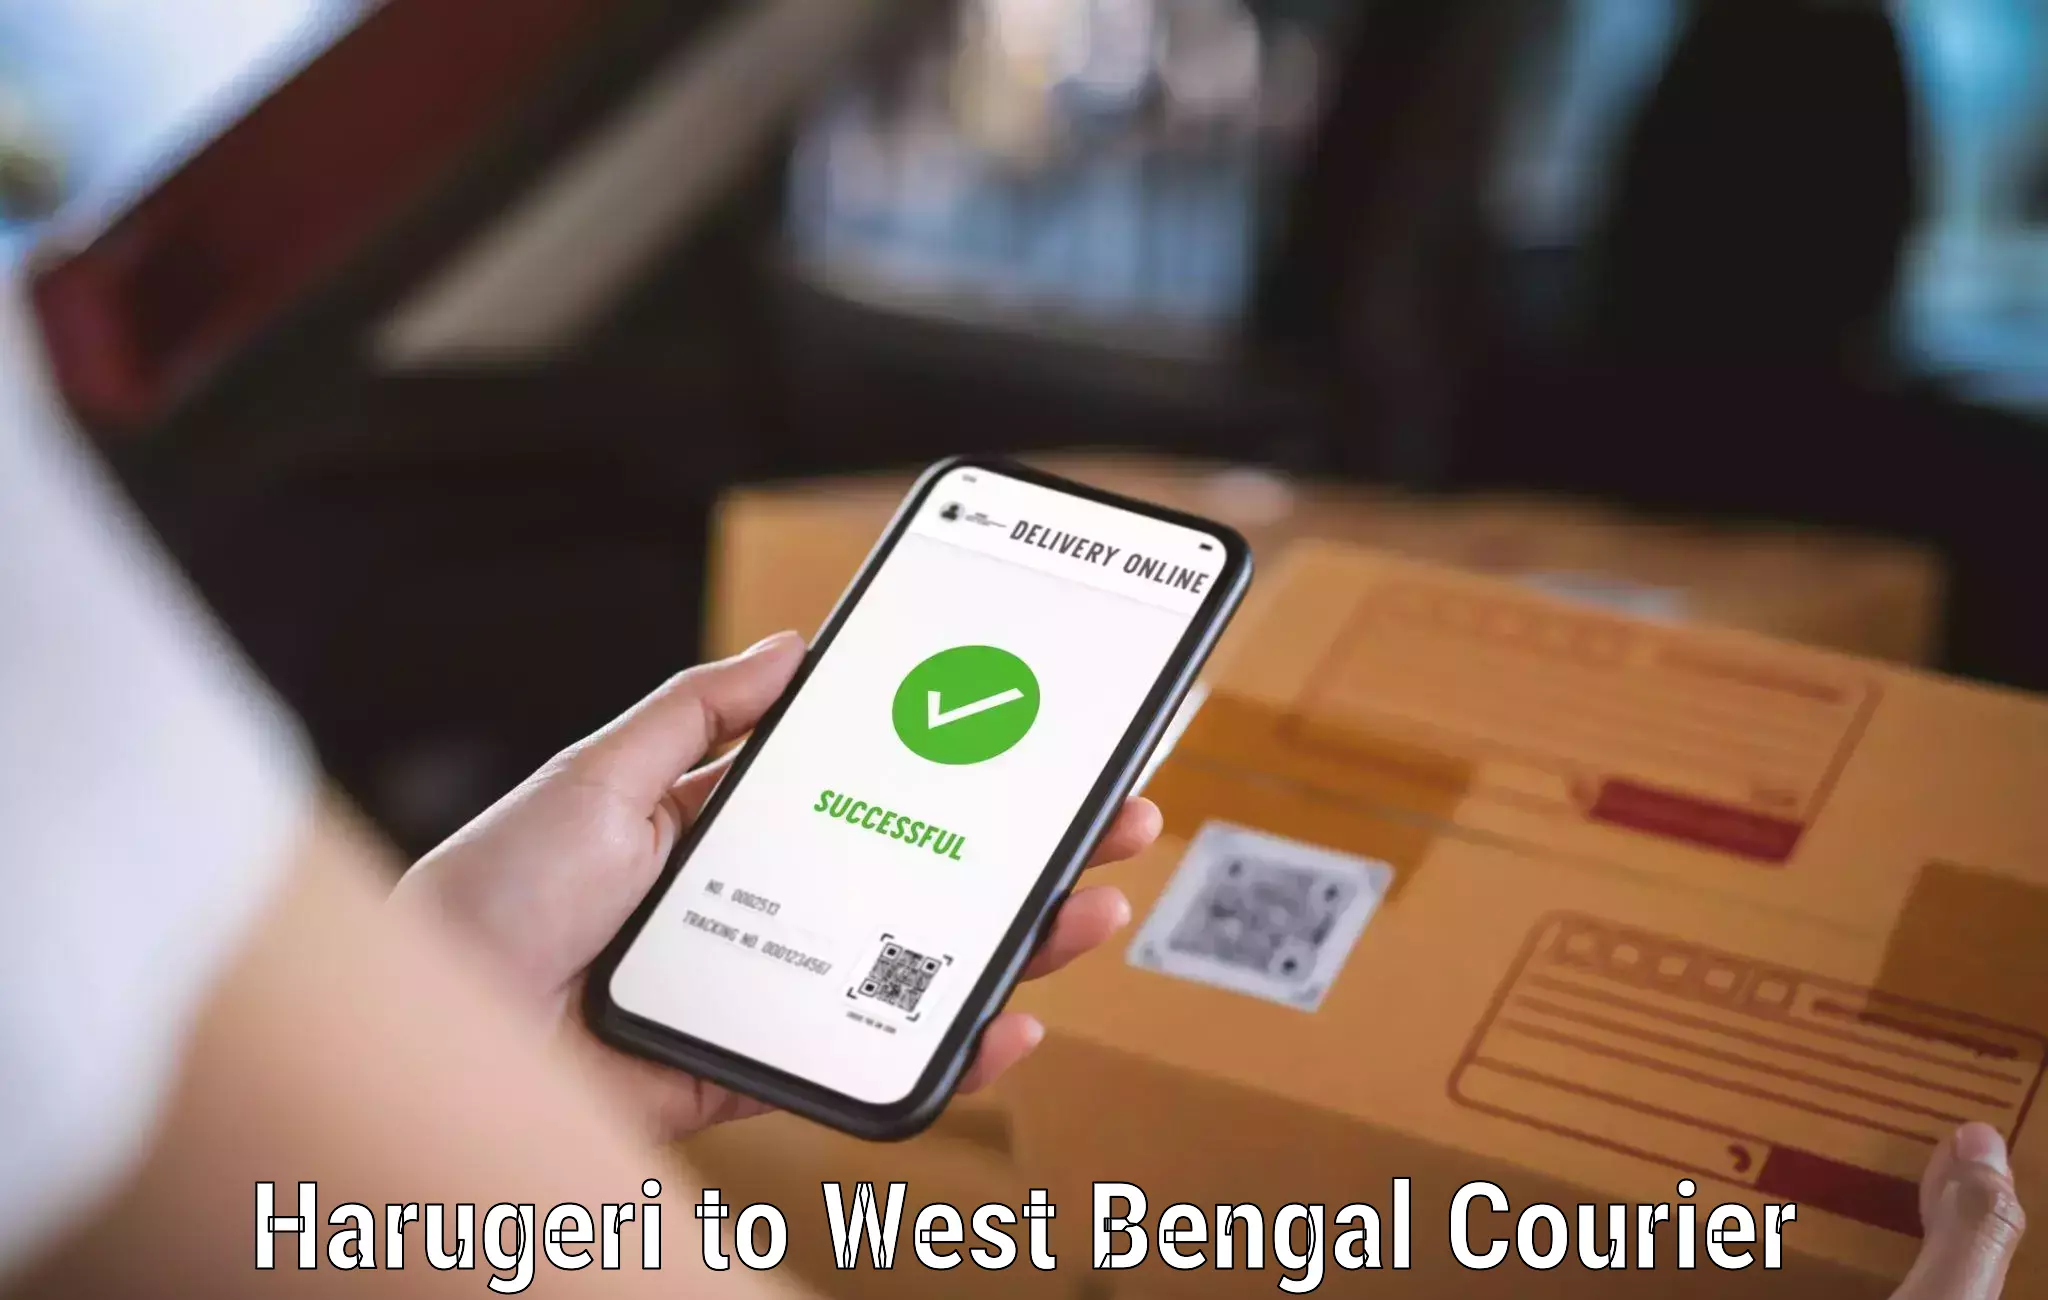 Weekend courier service Harugeri to Hooghly